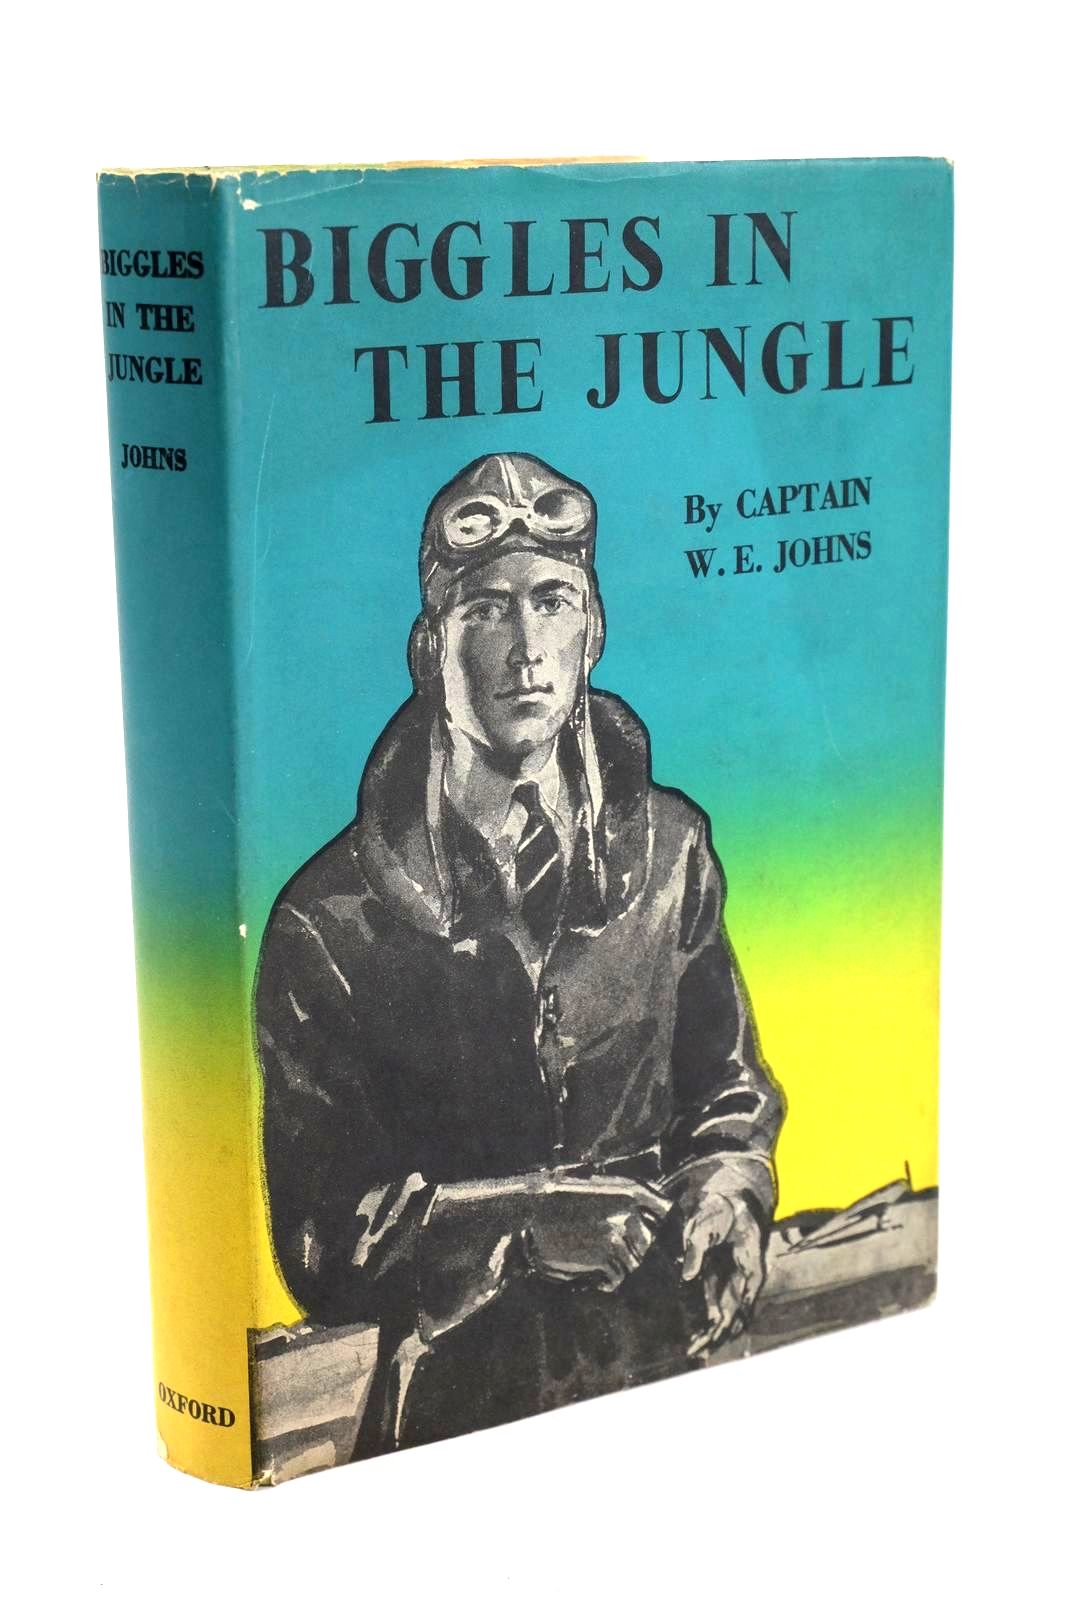 Photo of BIGGLES IN THE JUNGLE written by Johns, W.E. illustrated by Cuneo, Terence published by Geoffrey Cumberlege, Oxford University Press (STOCK CODE: 1324264)  for sale by Stella & Rose's Books